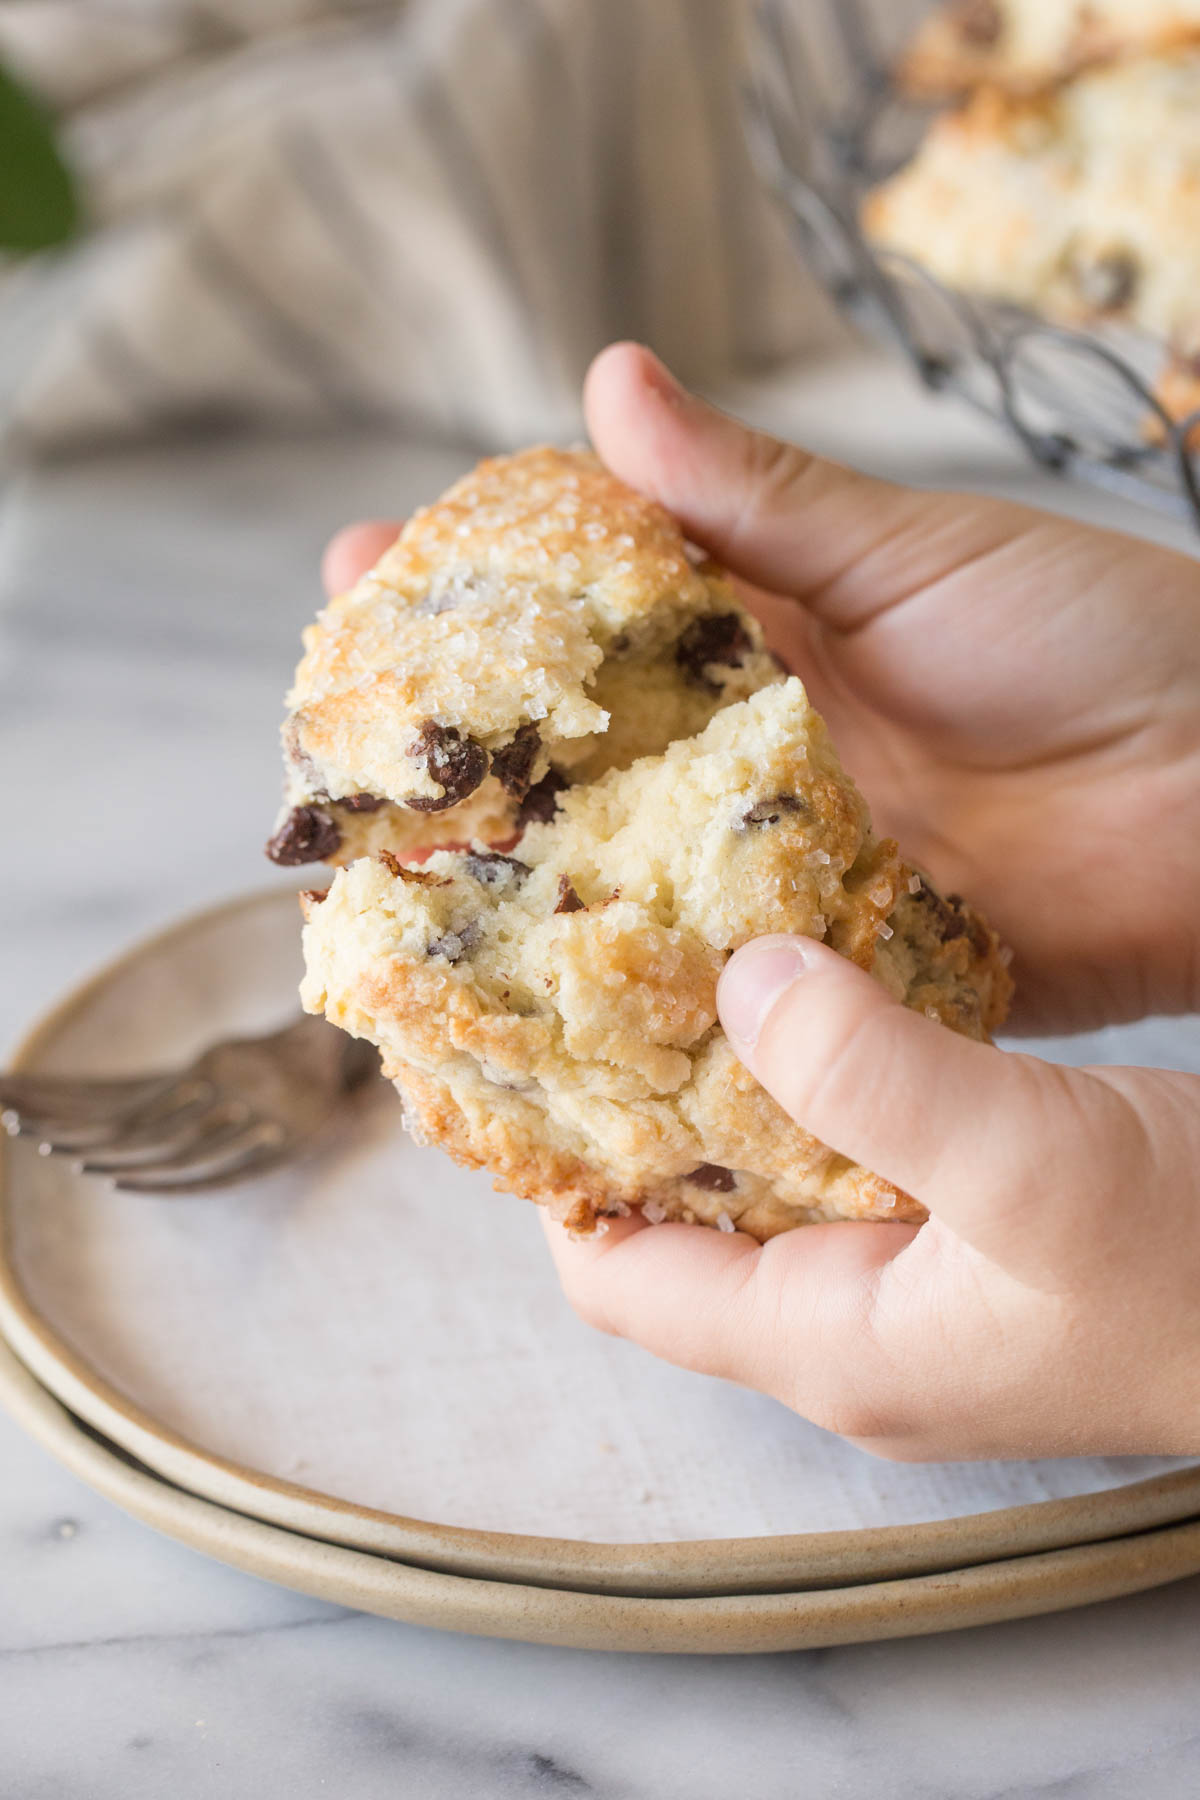 Two hands breaking open a Chocolate Chip Scone.  